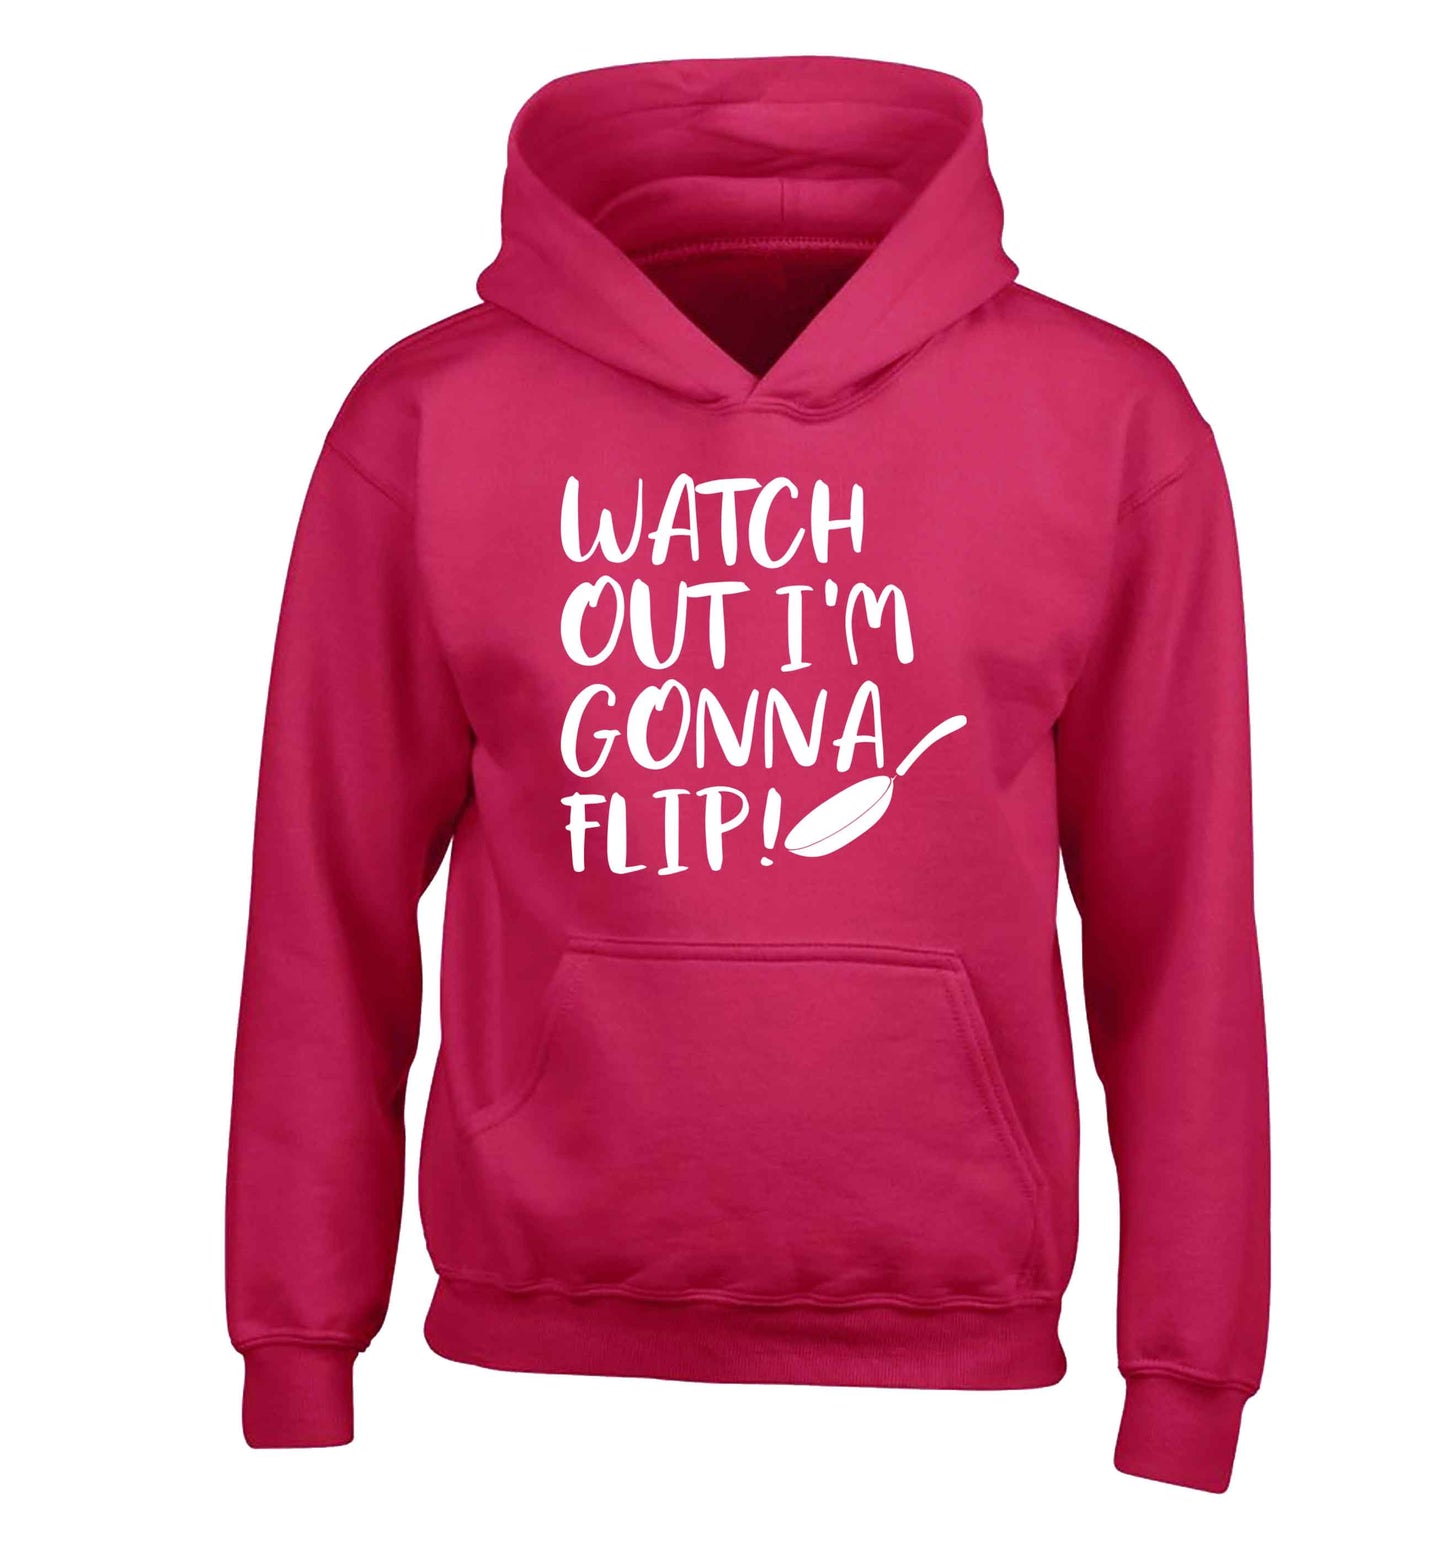 Watch out I'm gonna flip! children's pink hoodie 12-13 Years